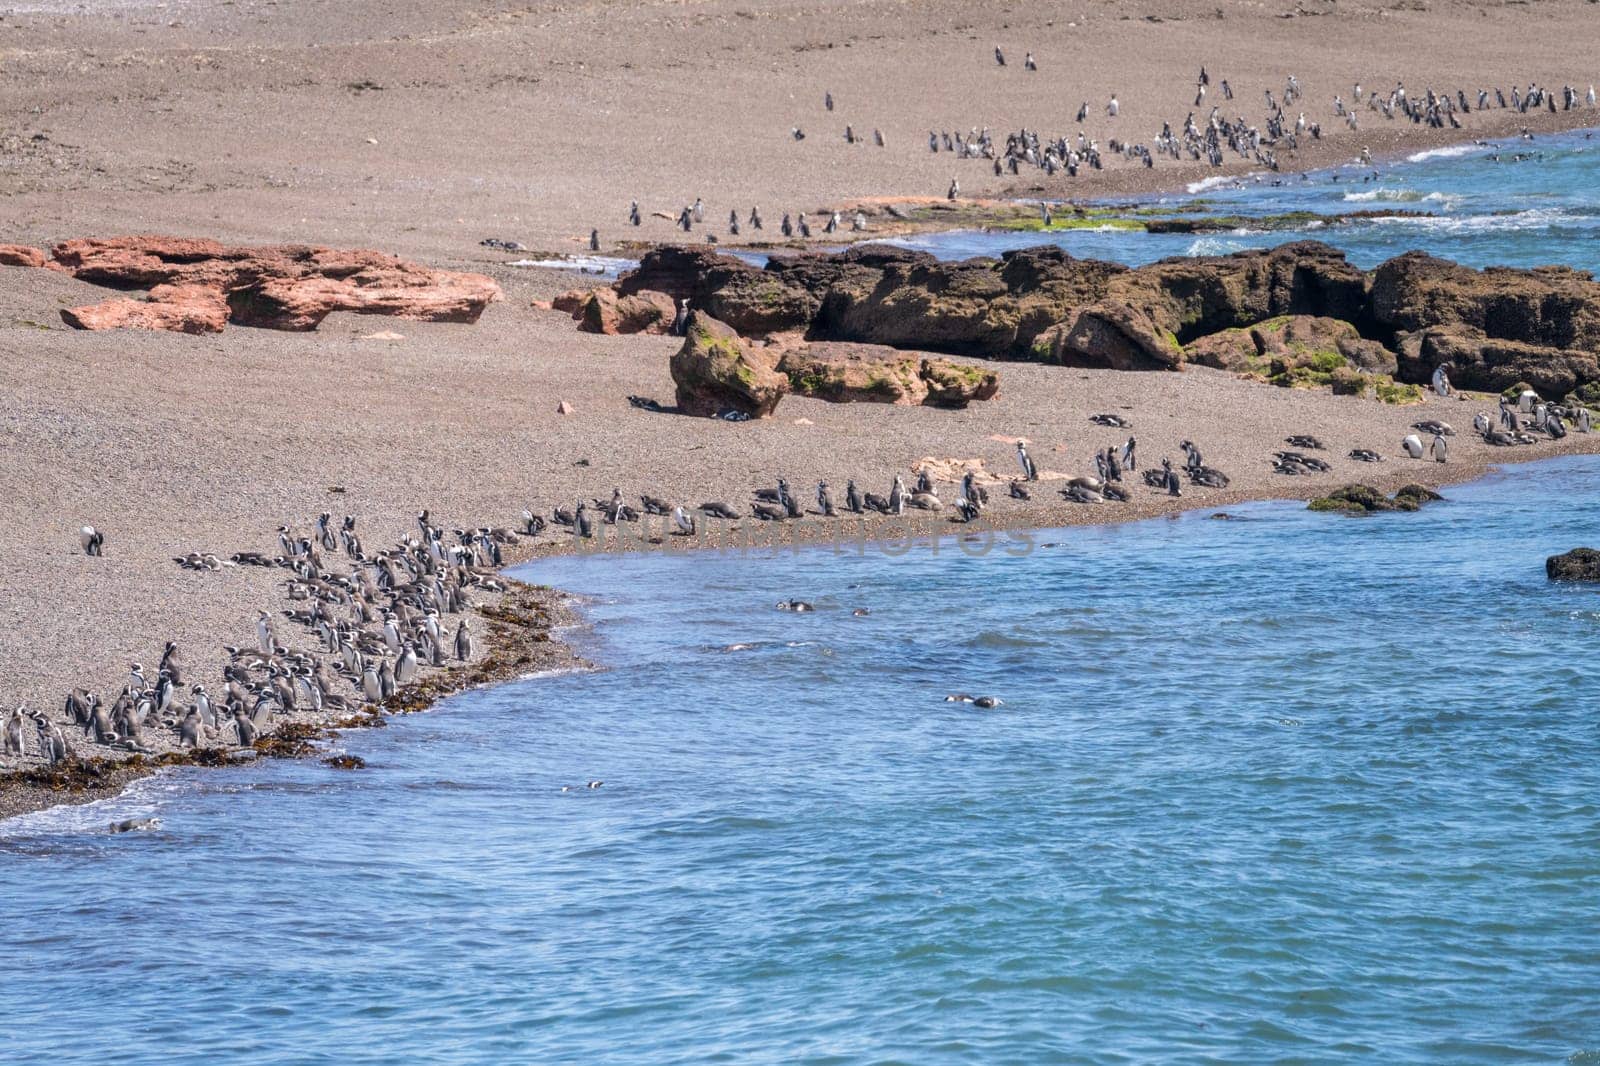 Hundreds of magellanic penguins standing on the beach in Punta Tombo penguin sanctuary in Chubut province